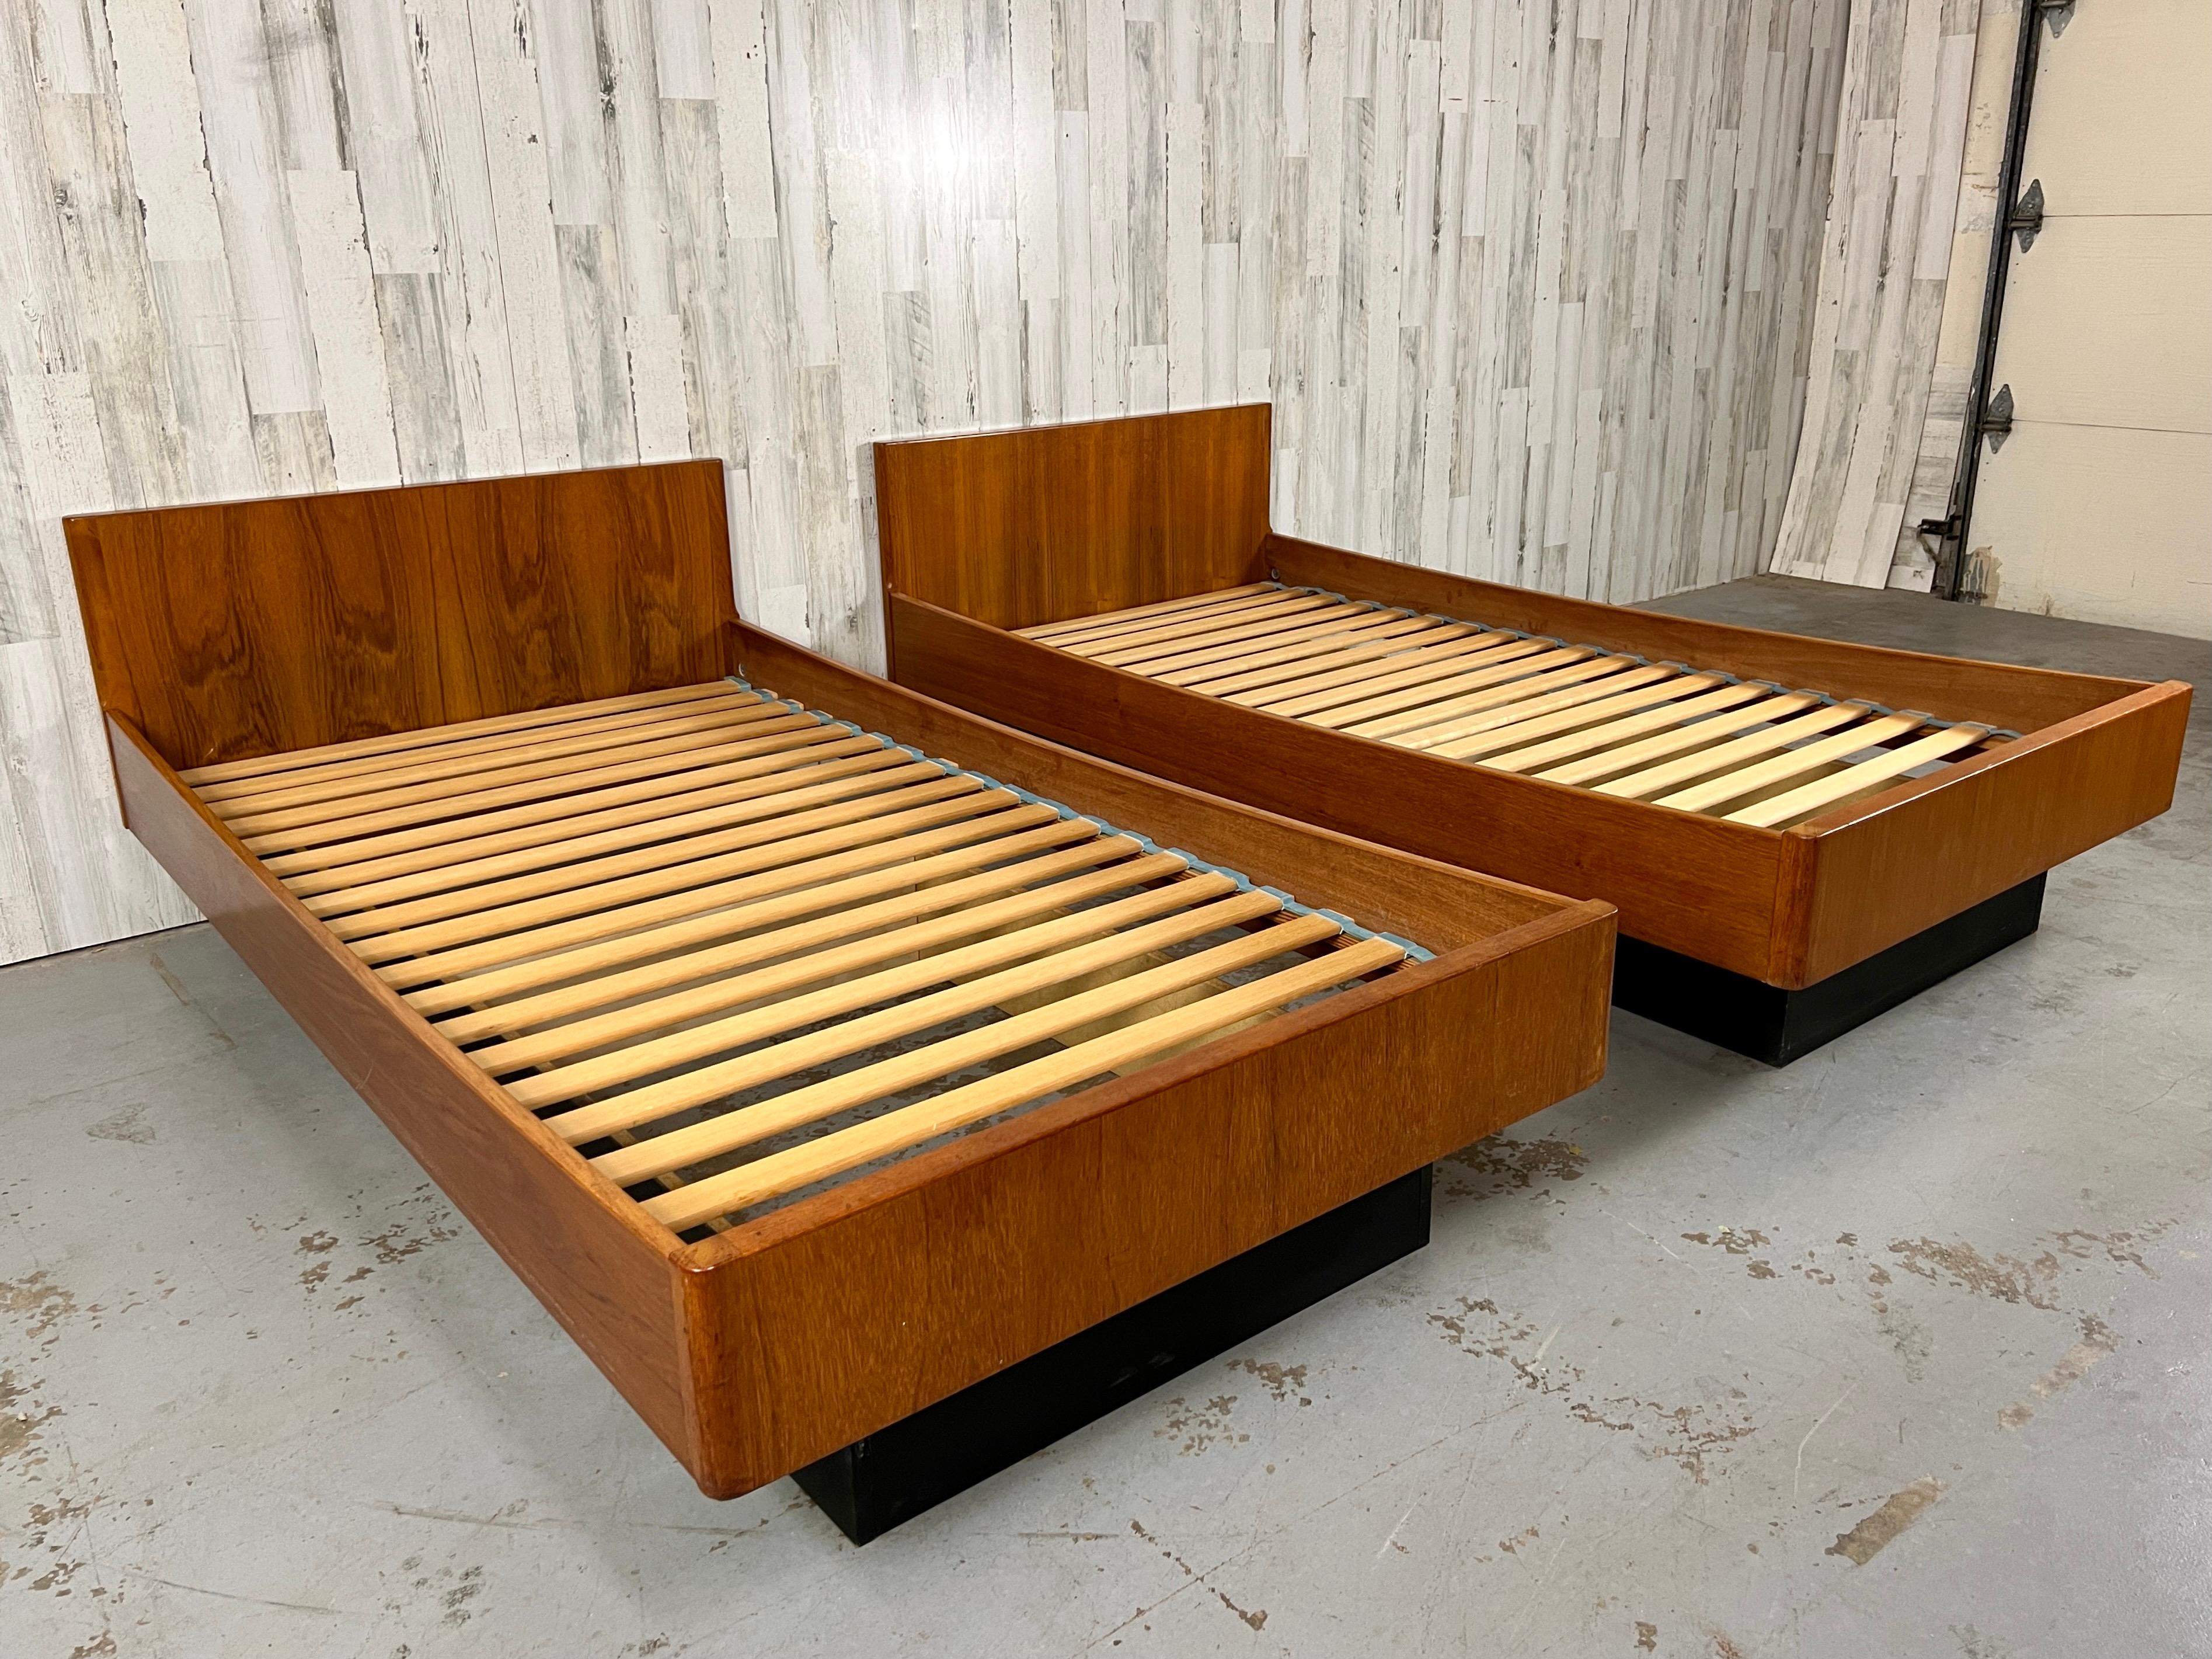 Teak Twin Platform Beds made by W&B Axelsens Mobilfabrik. A combination of  solid and teak veneer make this pair of beds very dramatic, or they can be pushed together for a king-size bed.

Footboard 15 1/8